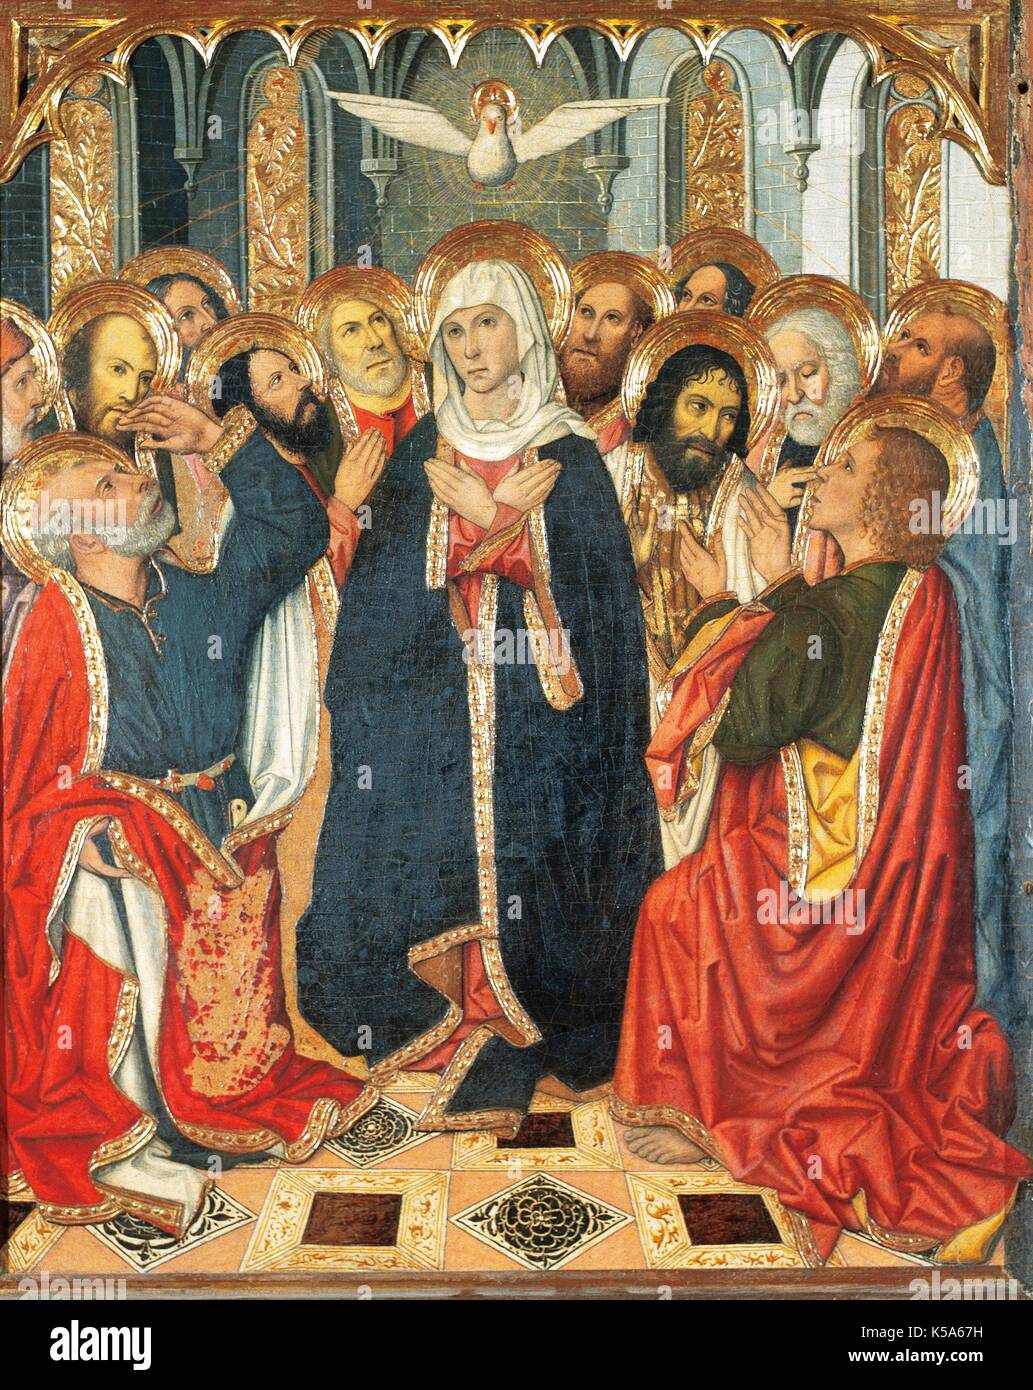 Gothic period. Table of Pentecost. From the Altarpiece of Constable of Portugal (1464-1465). Paint on wood. By Jaume Huguet (1414-1492). XV Century. Royal Chapel of Santa Agata. Barcelona, Catalonia. Spain. Stock Photo